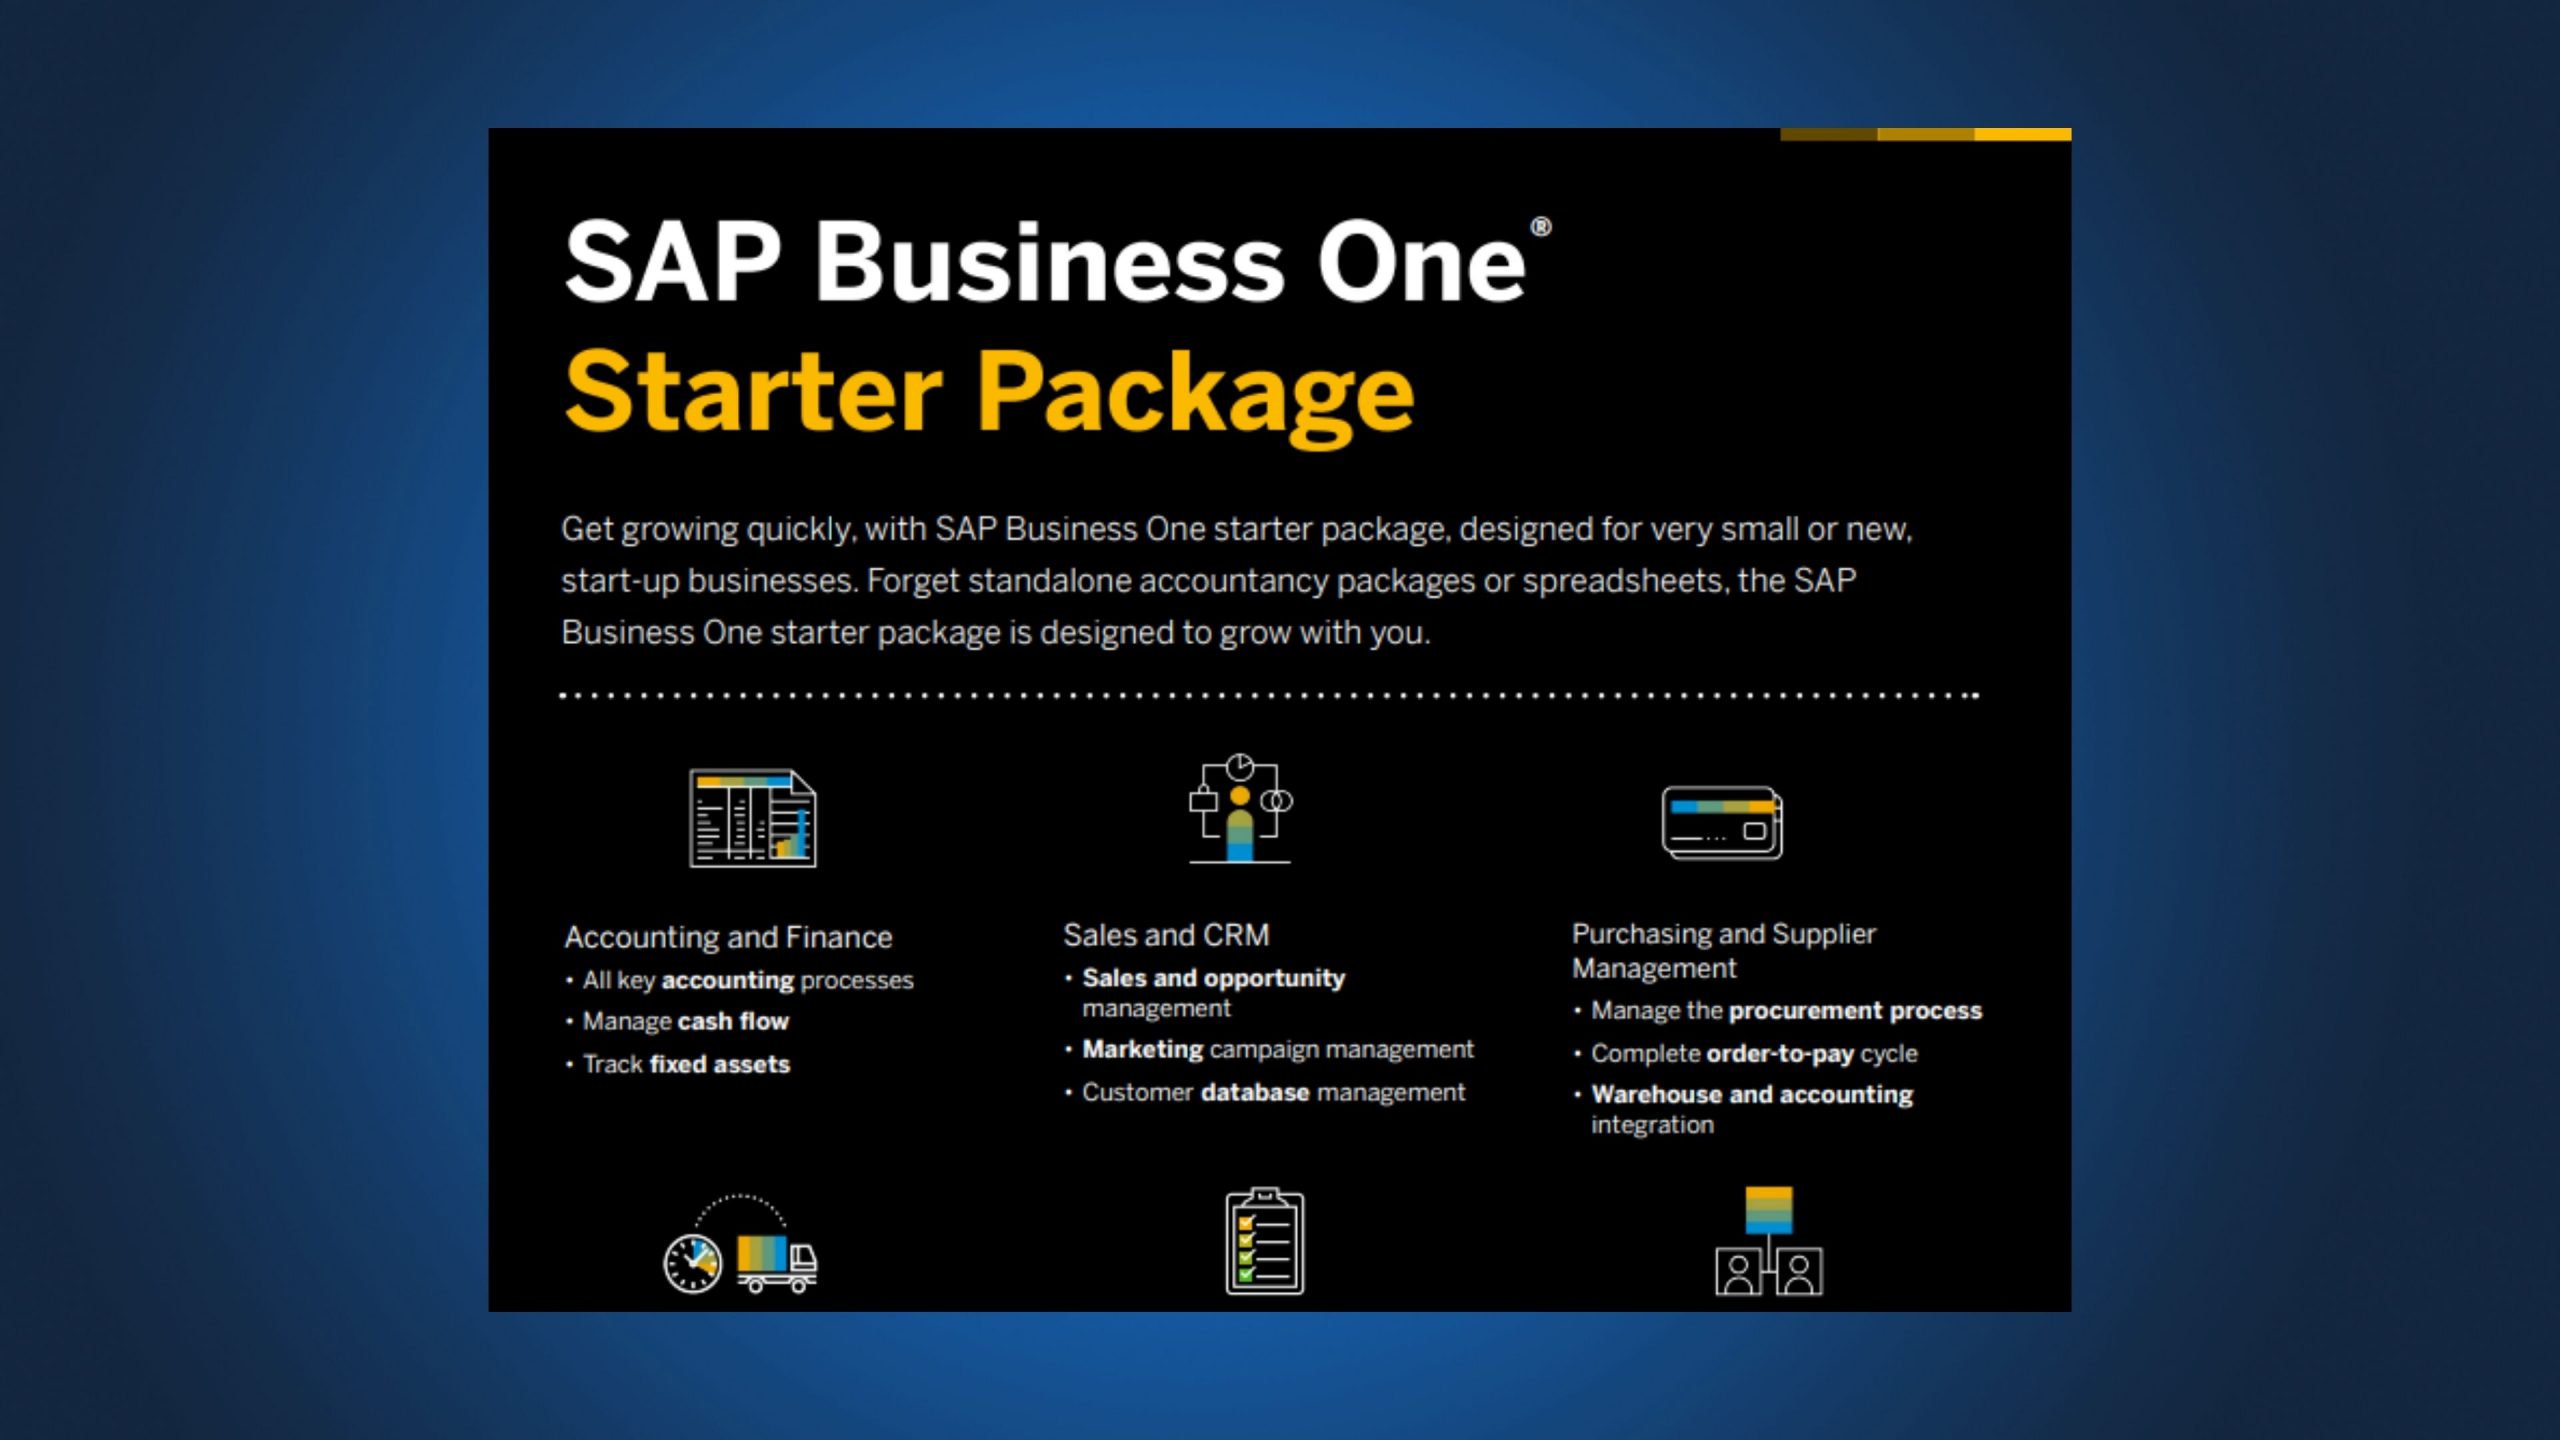 SAP Business One Starter Package infographic